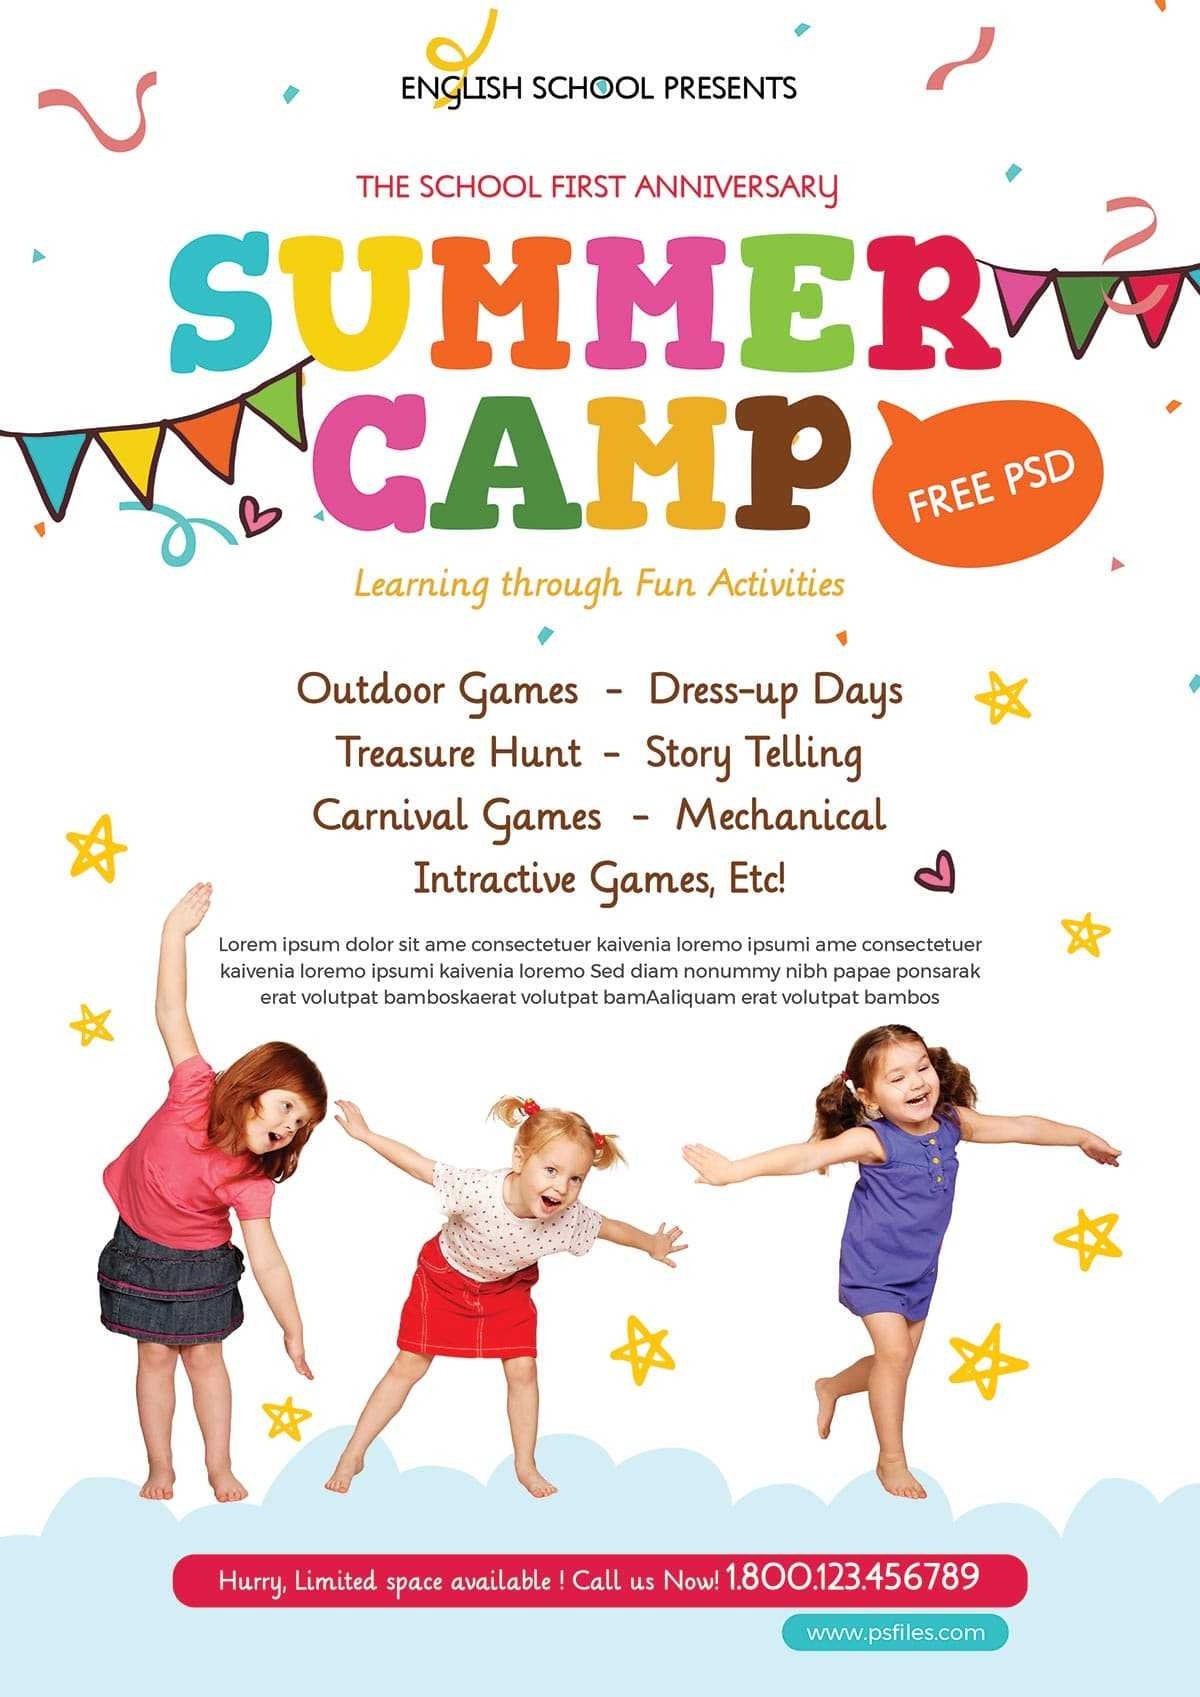 Kids Summer Camp Party Free Psd Flyer Template – Stockpsd For Summer Camp Brochure Template Free Download